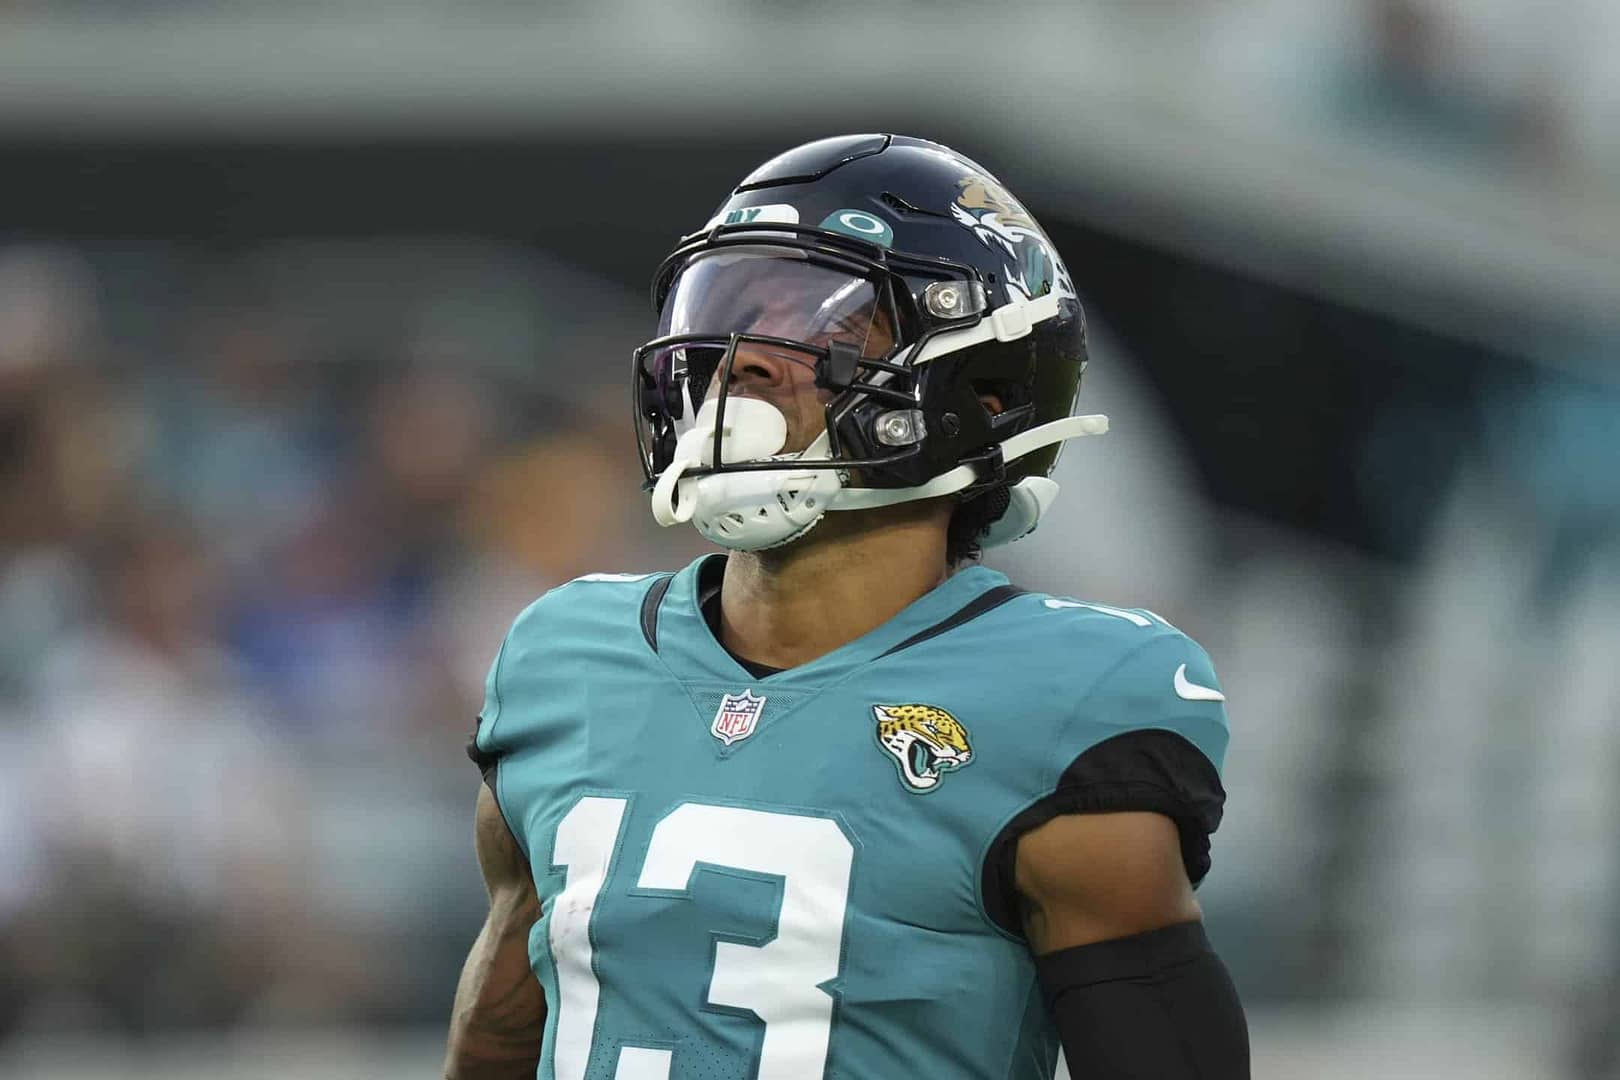 The best Jaguars-Falcons same-game parlay involves a bet on the side and total and a player prop for Christian Kirk, with...